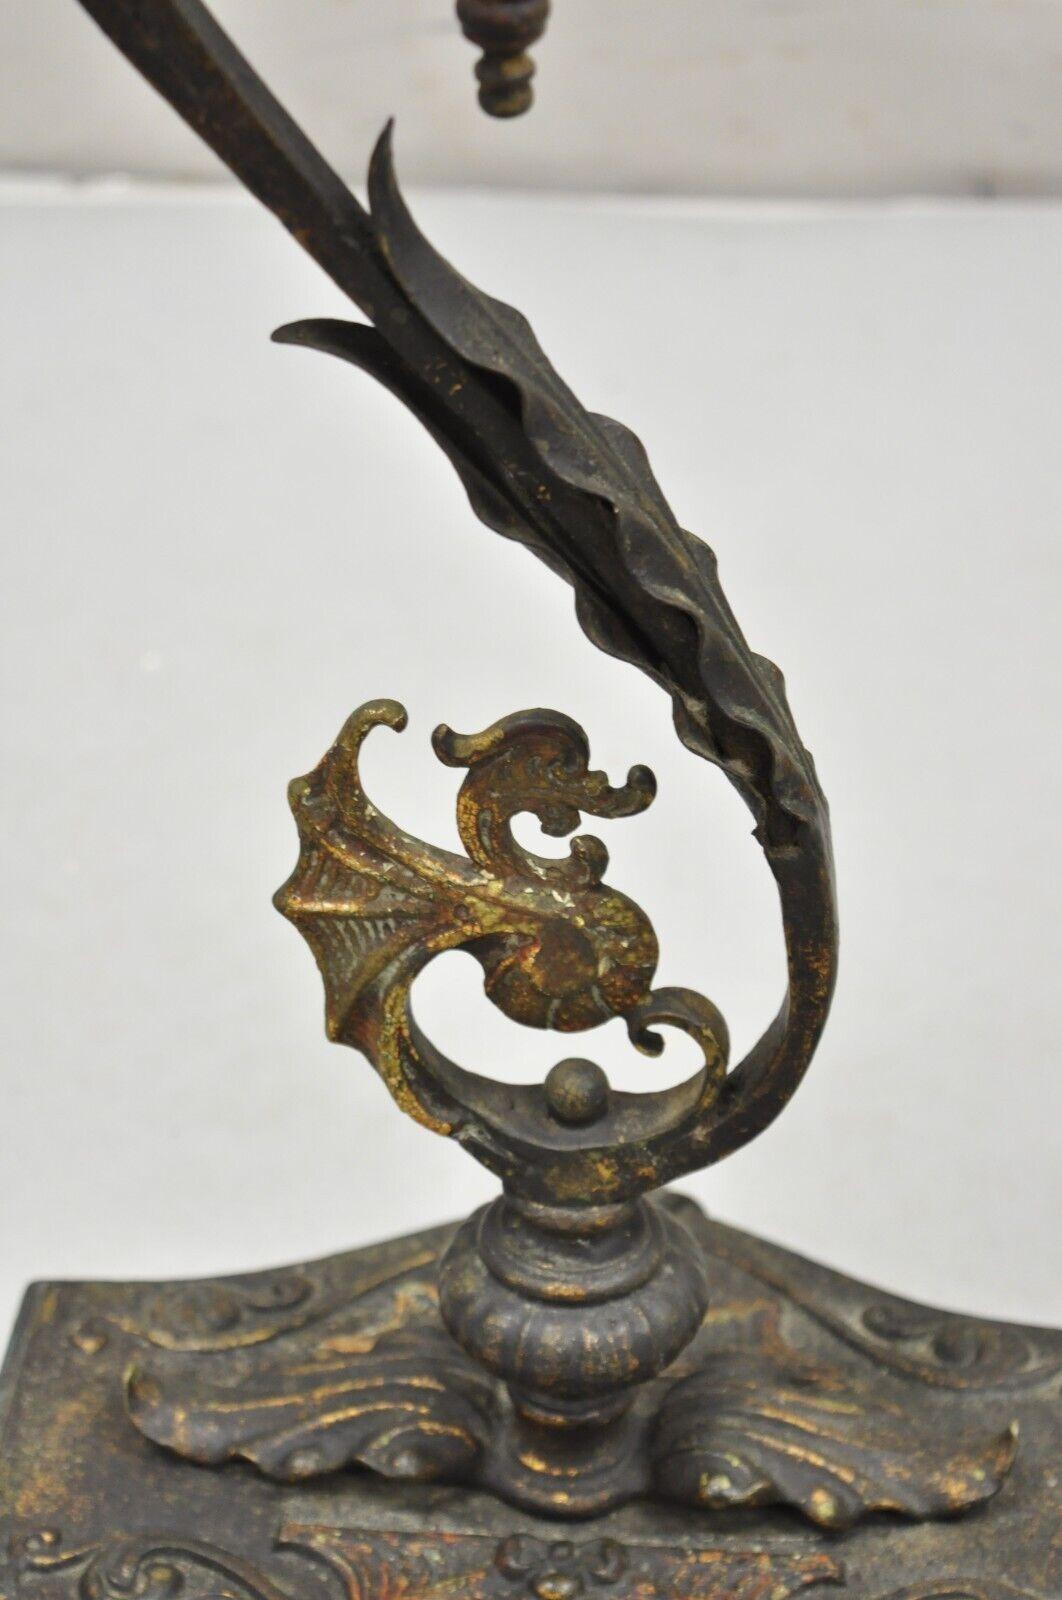 Antique French Art Nouveau Figural Cast Wrought Iron Ashtray Catch All Stand.  Circa 19th Century. Measurements: 27